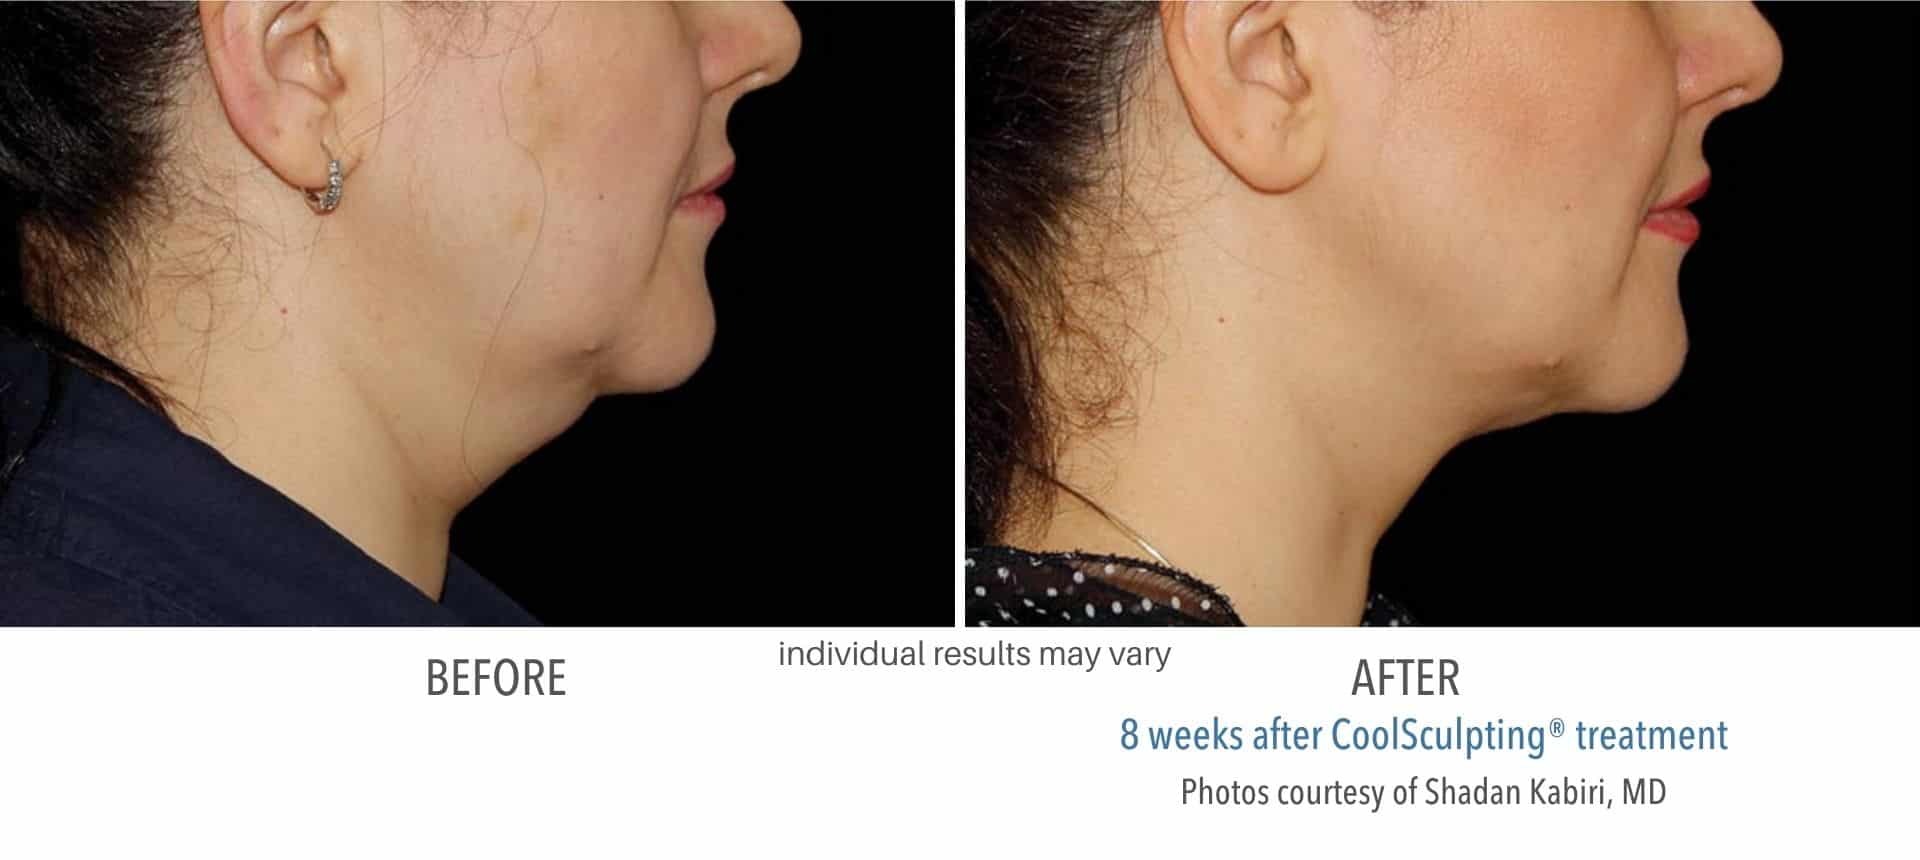 Woman's chin before and after coolsculpting treatment.